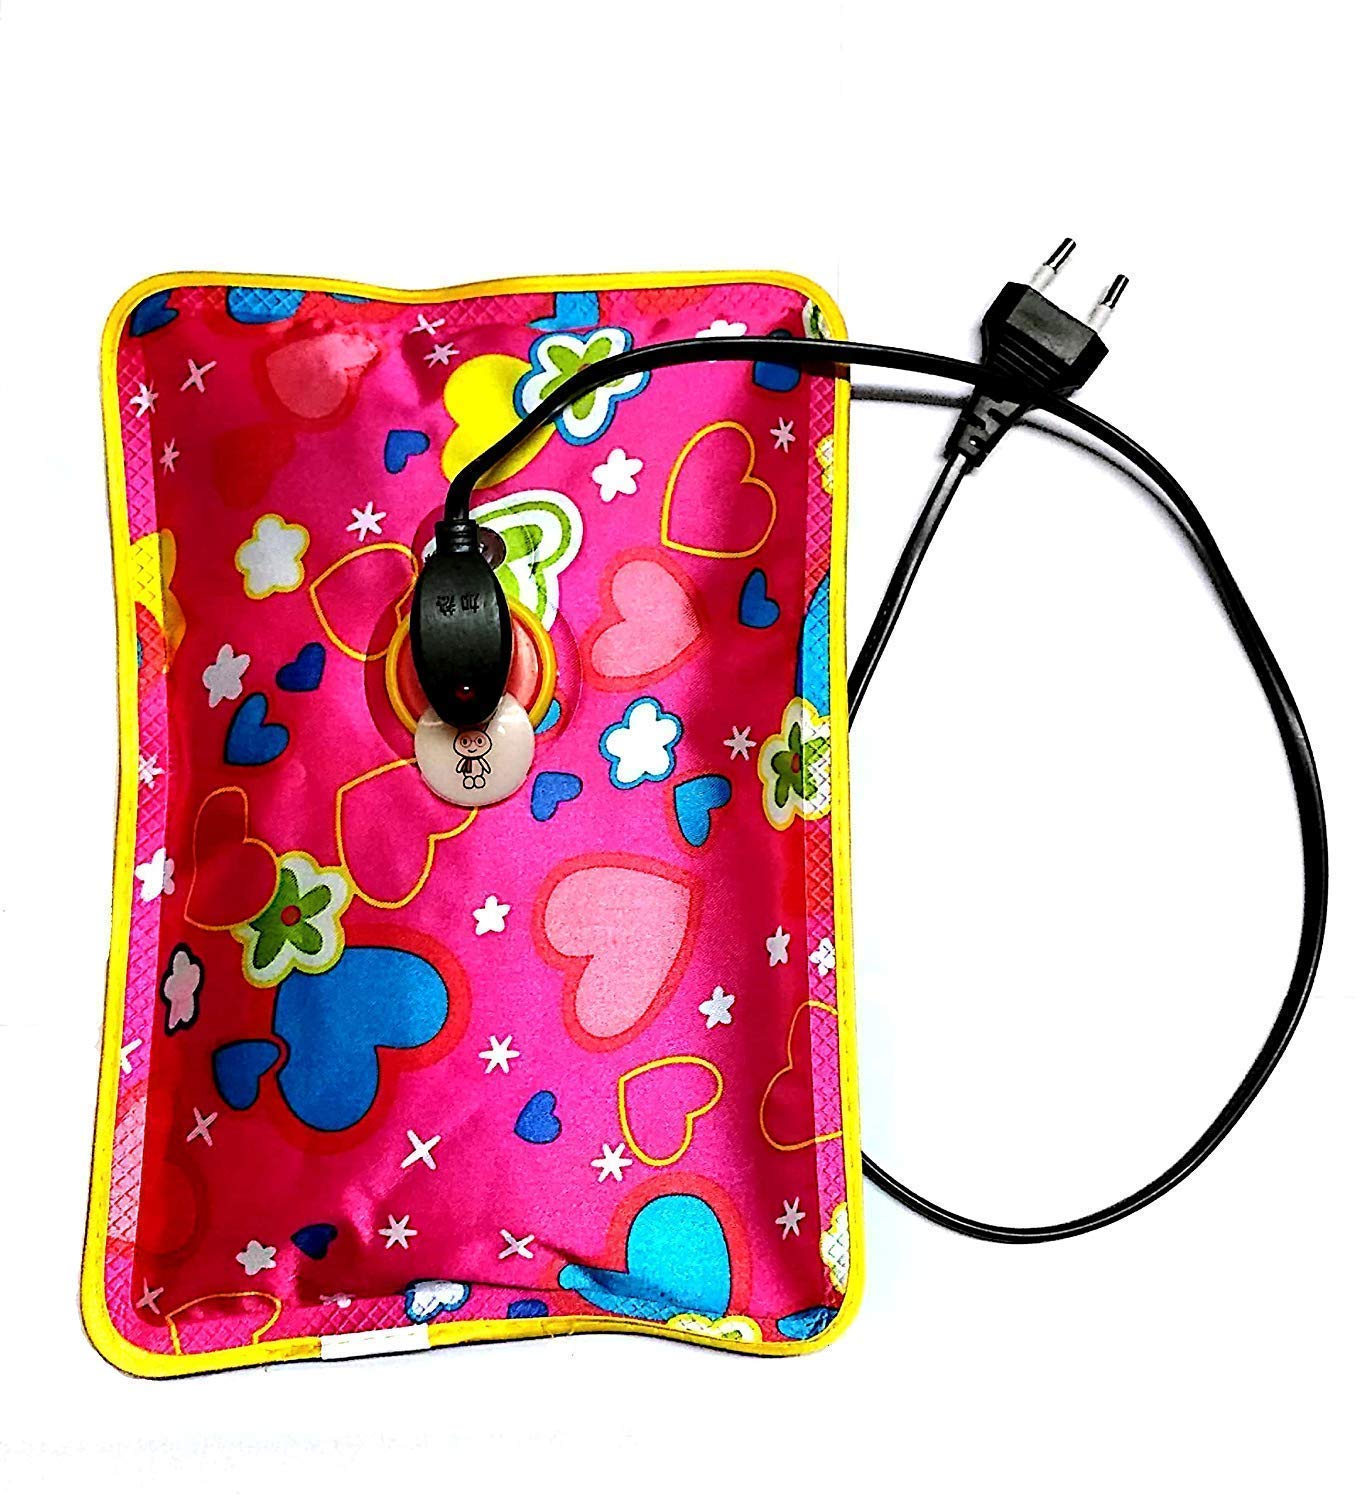 Hot Water Gel Warm Bag /Bottle /pad for Pain Relief with Gel For Winters Auto Cut Feature. Assorted Color & Design Heating Pad